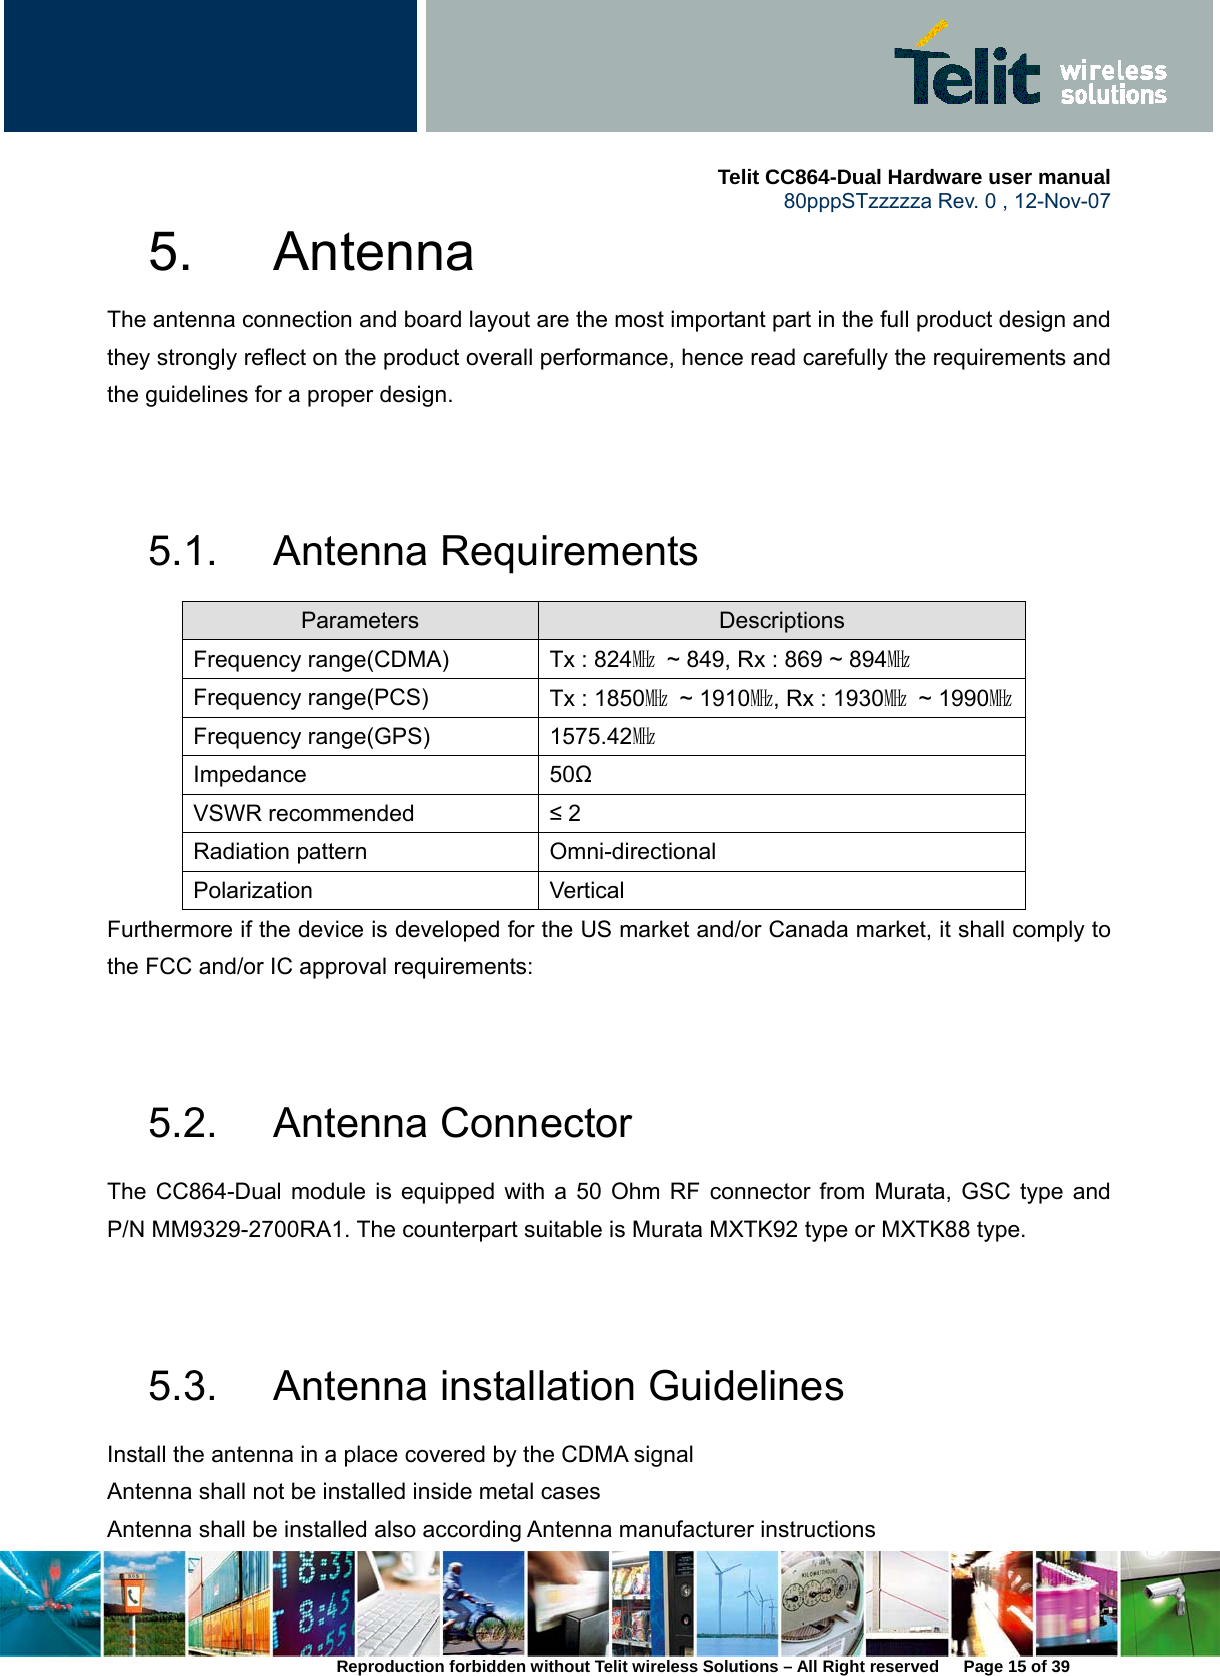     Telit CC864-Dual Hardware user manual   80pppSTzzzzza Rev. 0 , 12-Nov-07 Reproduction forbidden without Telit wireless Solutions – All Right reserved      Page 15 of 39 5. Antenna  The antenna connection and board layout are the most important part in the full product design and they strongly reflect on the product overall performance, hence read carefully the requirements and the guidelines for a proper design.   5.1. Antenna Requirements Parameters  Descriptions Frequency range(CDMA)  Tx : 824㎒  ~ 849, Rx : 869 ~ 894㎒ Frequency range(PCS)  Tx : 1850㎒ ~ 1910㎒, Rx : 1930㎒ ~ 1990㎒ Frequency range(GPS)  1575.42㎒ Impedance 50Ω VSWR recommended  ≤ 2 Radiation pattern  Omni-directional Polarization Vertical Furthermore if the device is developed for the US market and/or Canada market, it shall comply to the FCC and/or IC approval requirements:   5.2. Antenna Connector The CC864-Dual module is equipped with a 50 Ohm RF connector from Murata, GSC type and P/N MM9329-2700RA1. The counterpart suitable is Murata MXTK92 type or MXTK88 type.   5.3.  Antenna installation Guidelines Install the antenna in a place covered by the CDMA signal Antenna shall not be installed inside metal cases Antenna shall be installed also according Antenna manufacturer instructions 